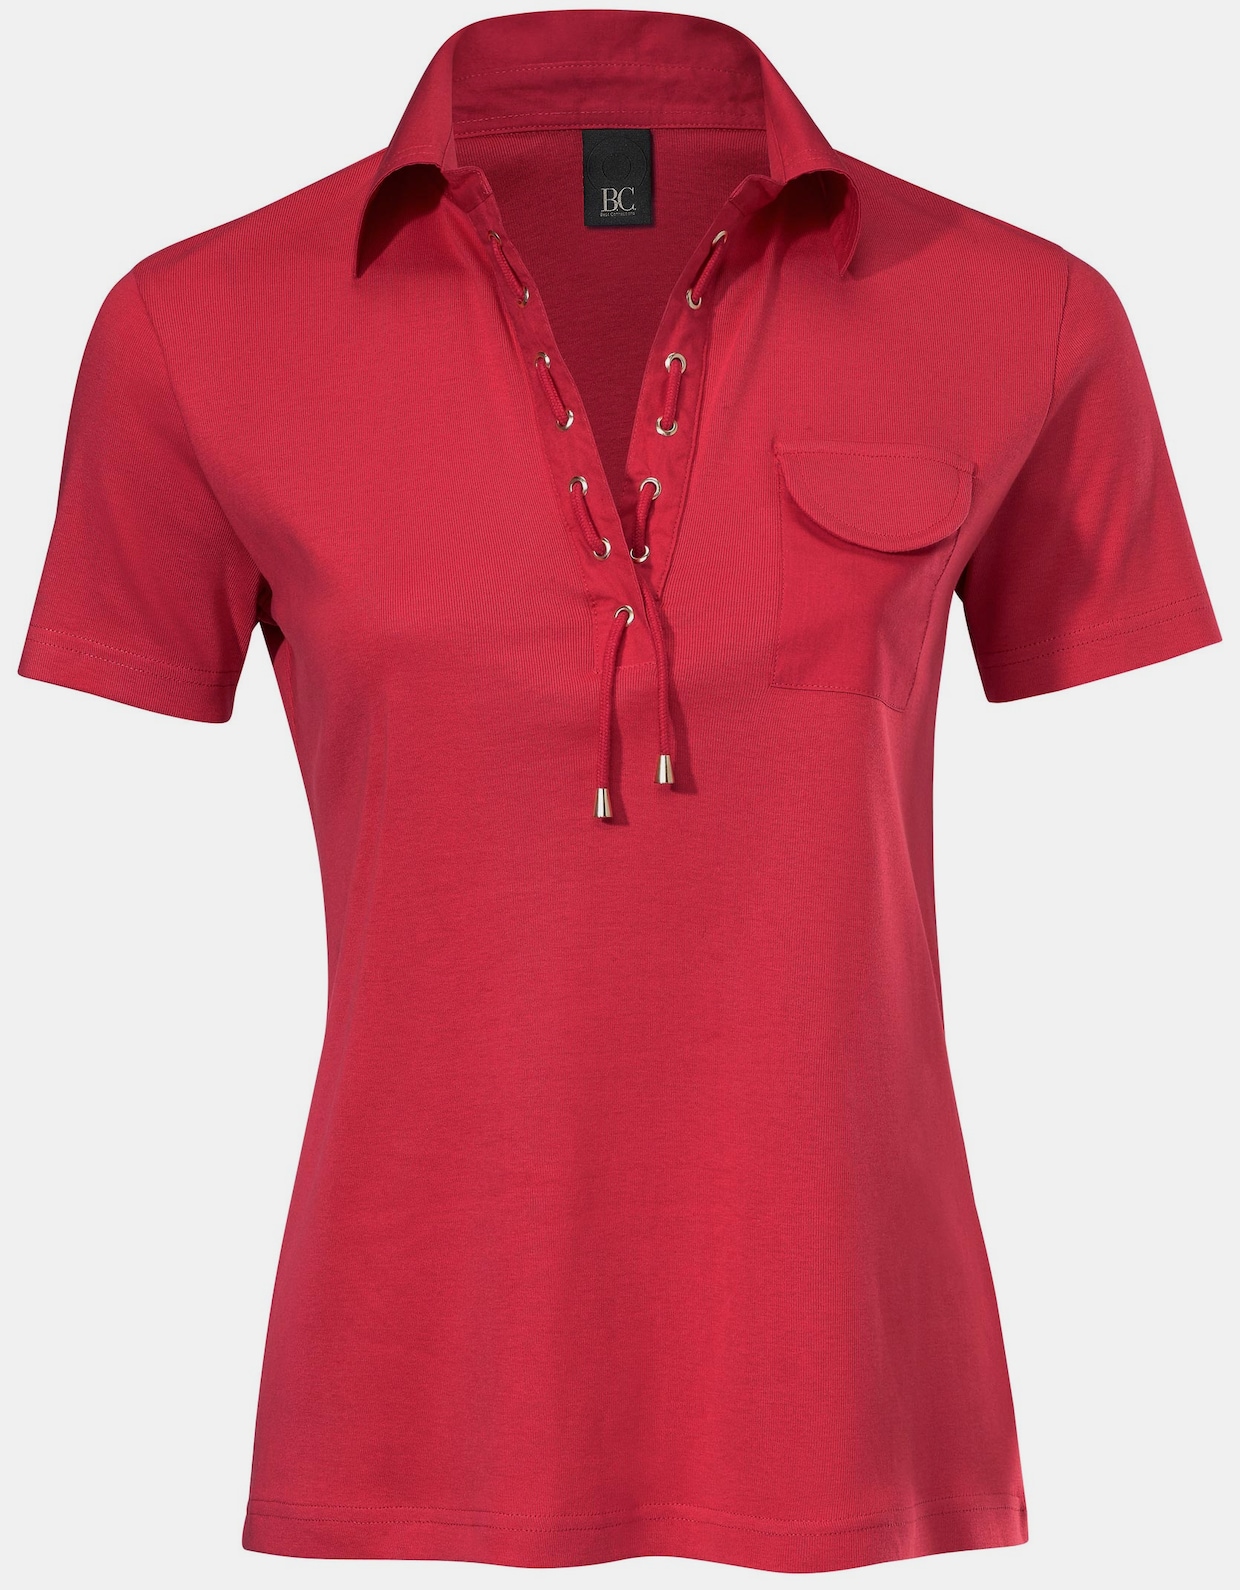 Best Connections Poloshirt - rood